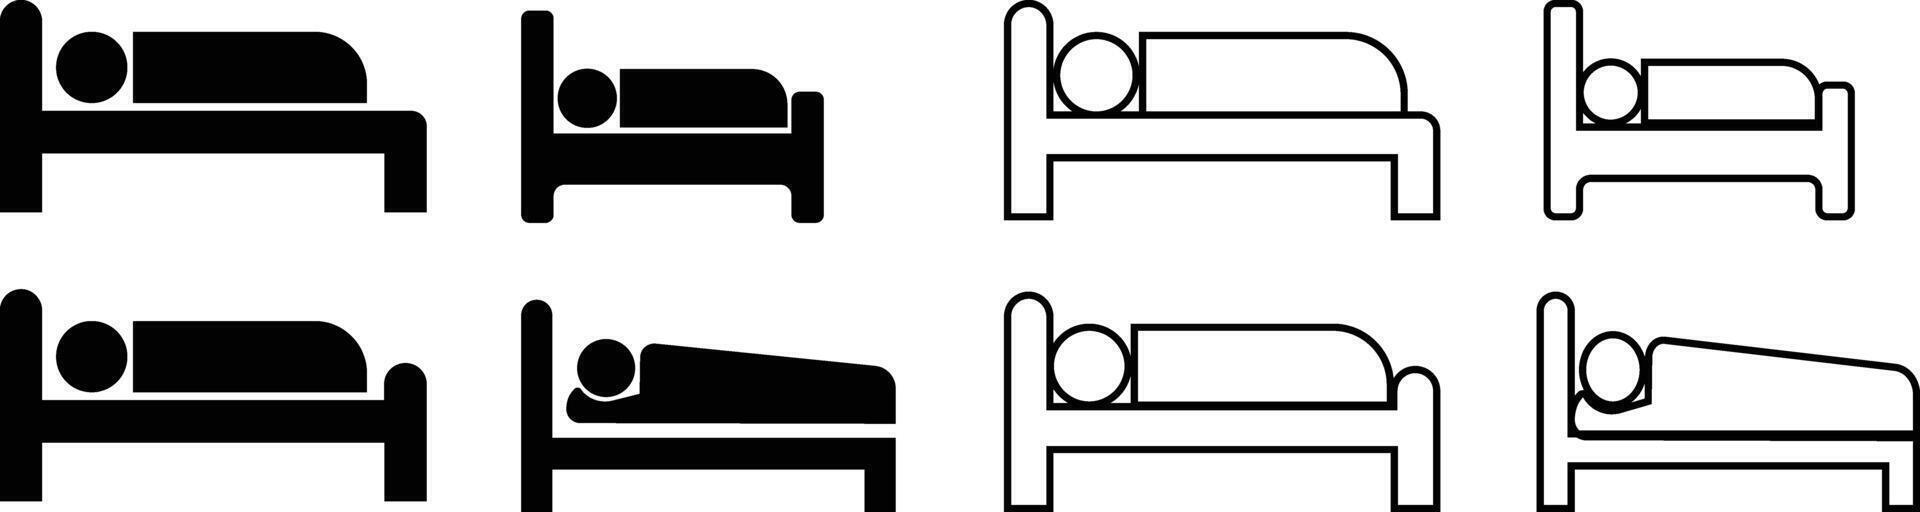 Sleeping man on bed icon in flat, line set. isolated on Man lying in bed having a dream concept template. symbol accommodation for hotel, hostel, motel. vector for apps web